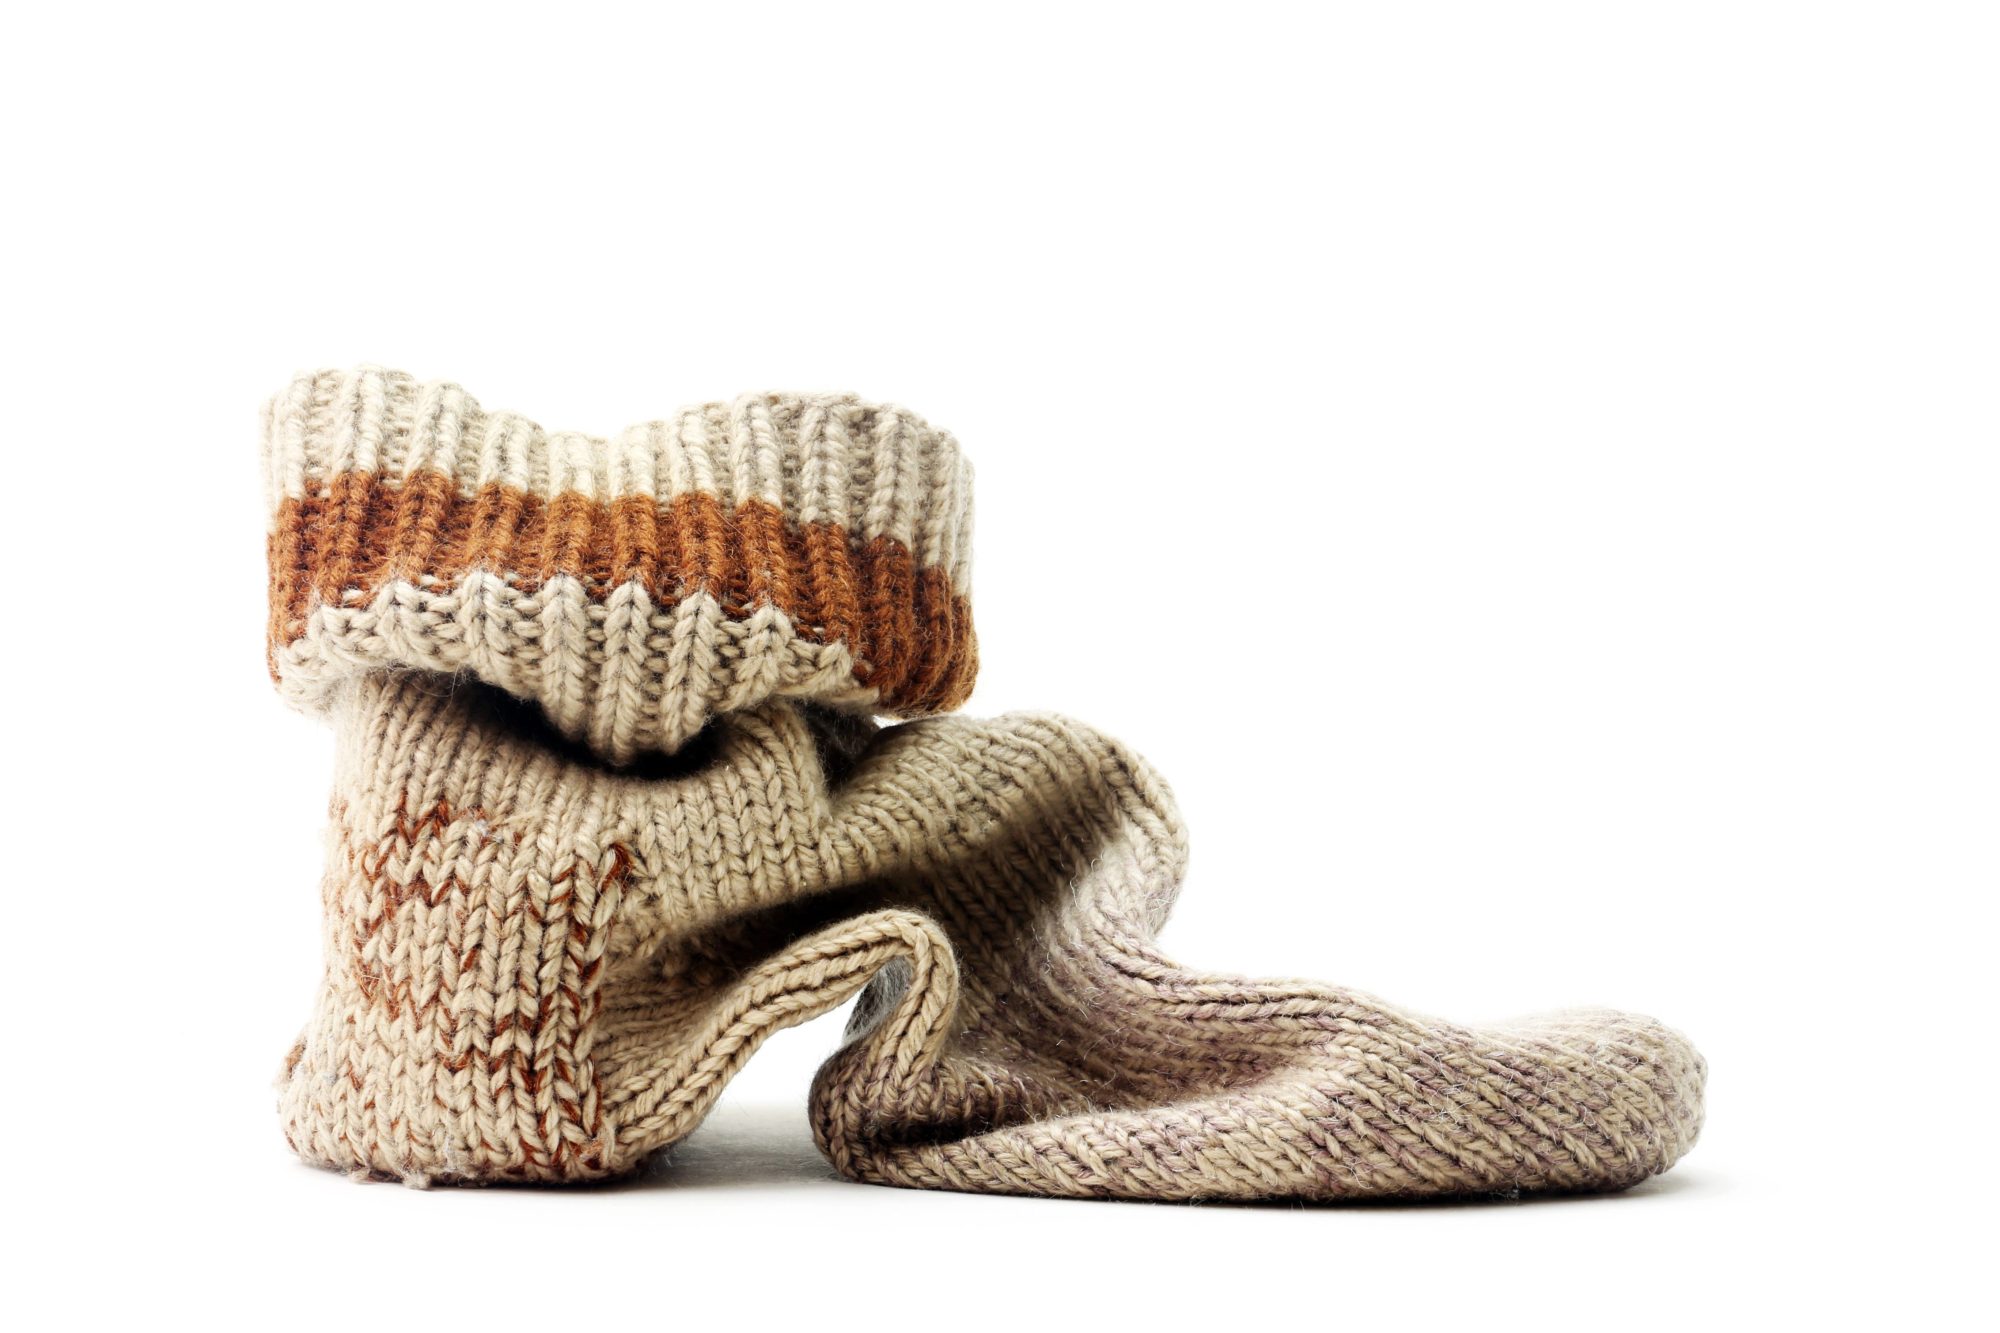 A used sock isolated on white